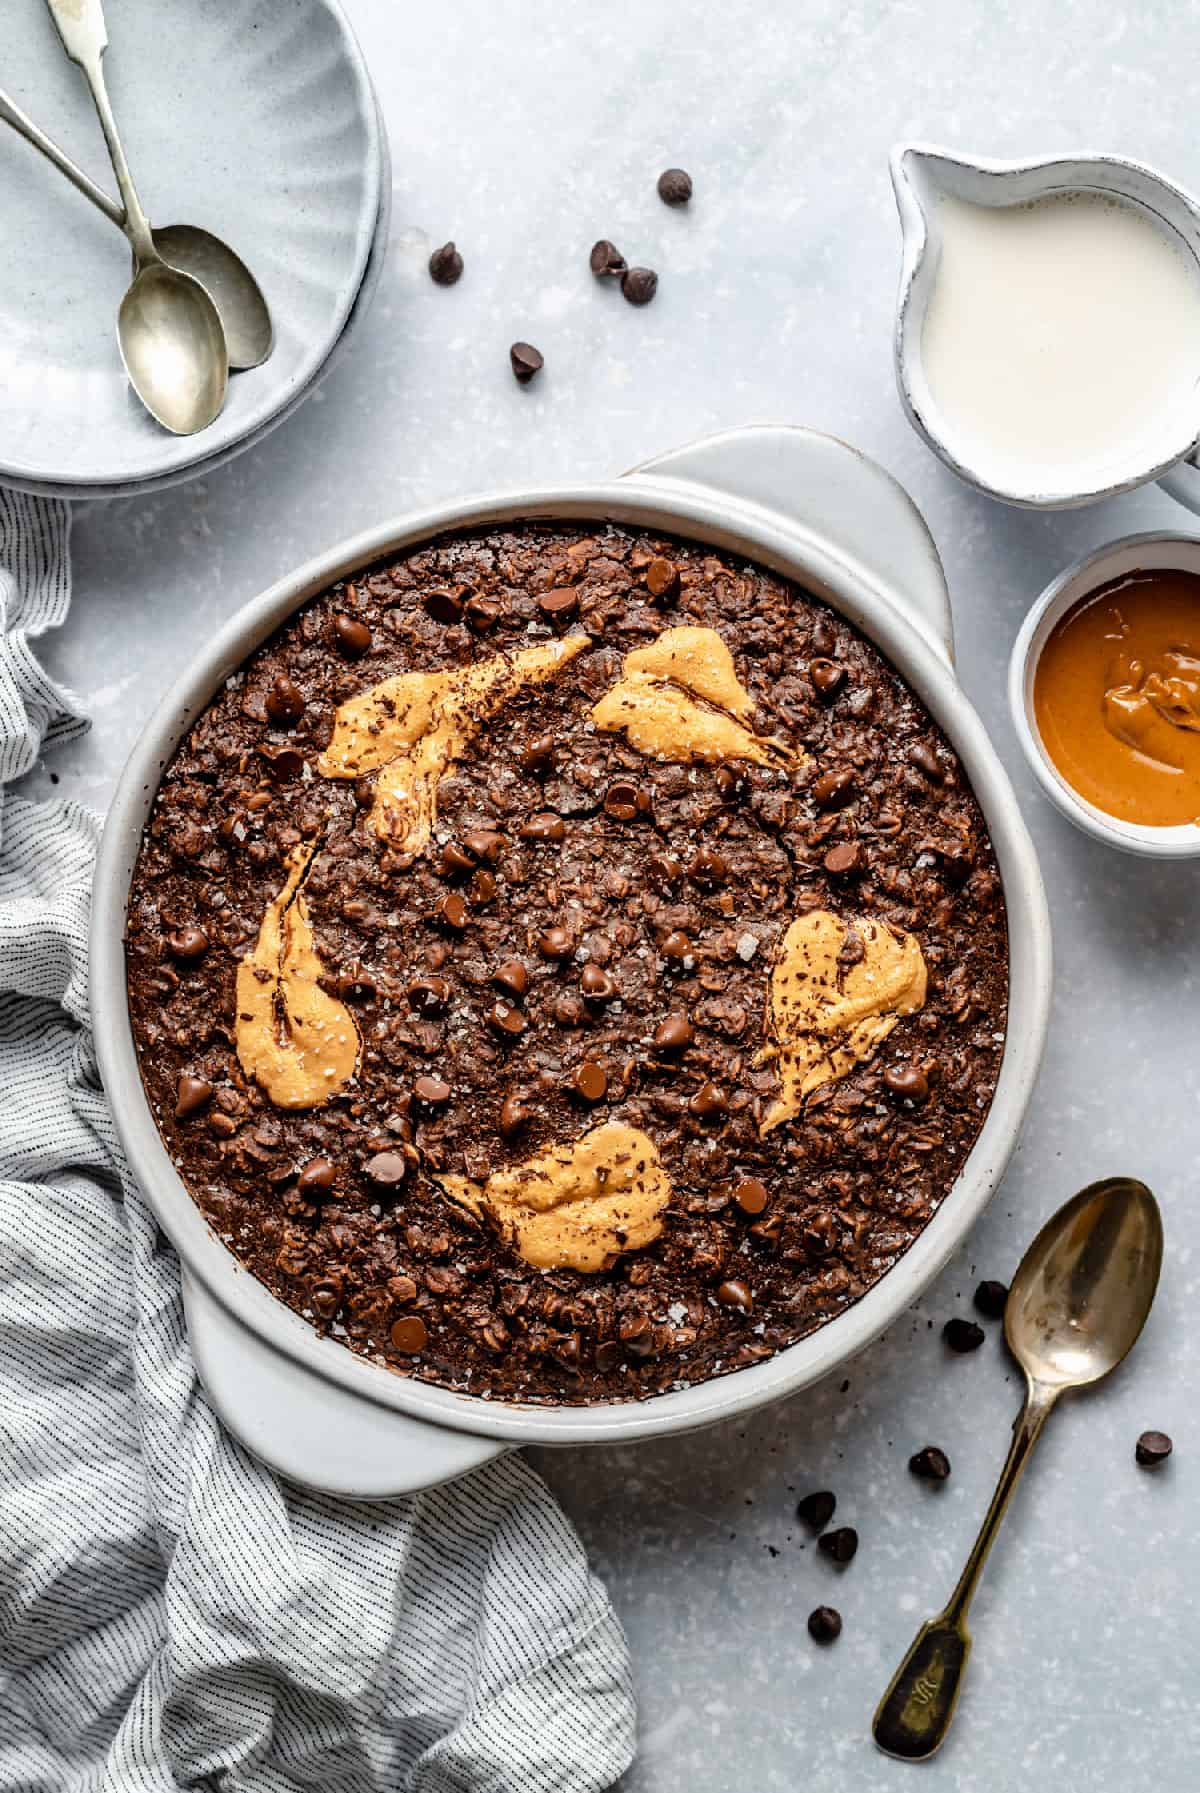 The baked chocolate peanut butter baked oatmeal in a dish with a spoon and bowls nearby.